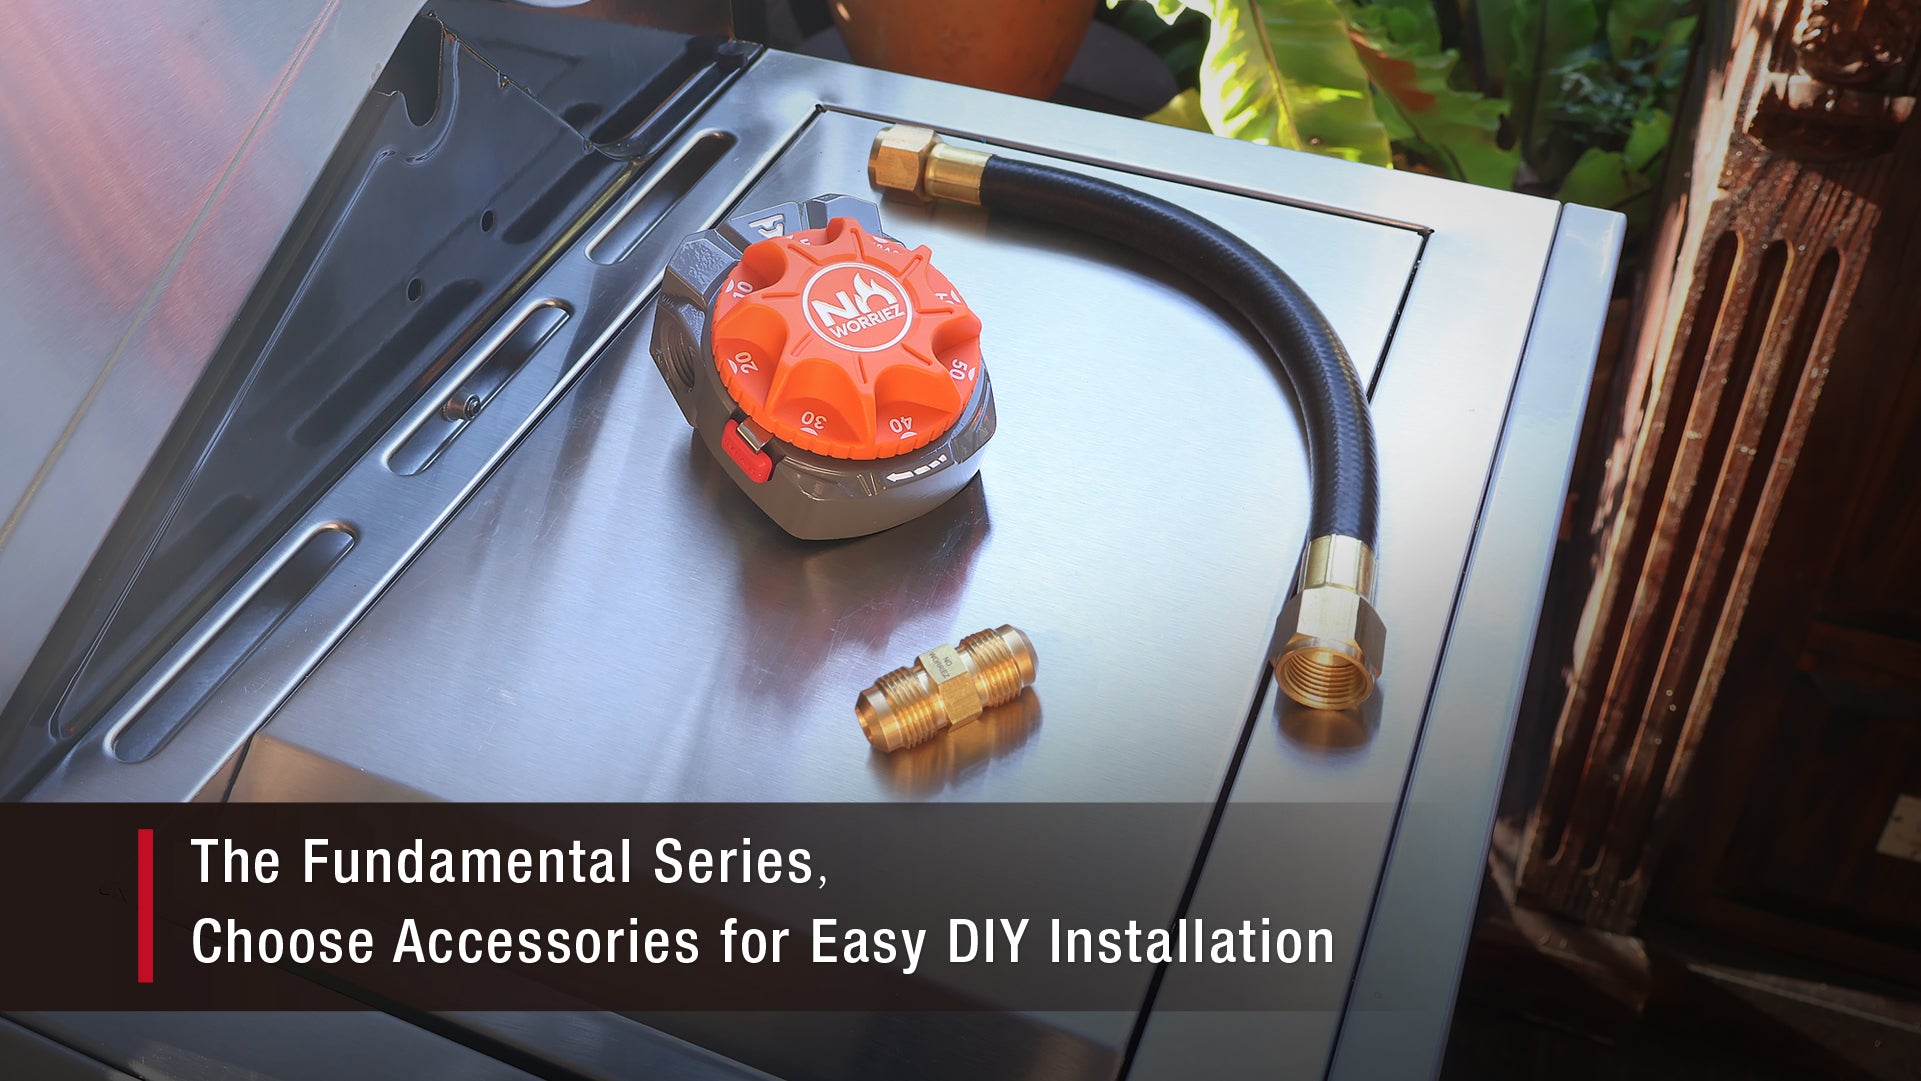 Commando gas timer is the fundamental series choose accessories for DIY installation